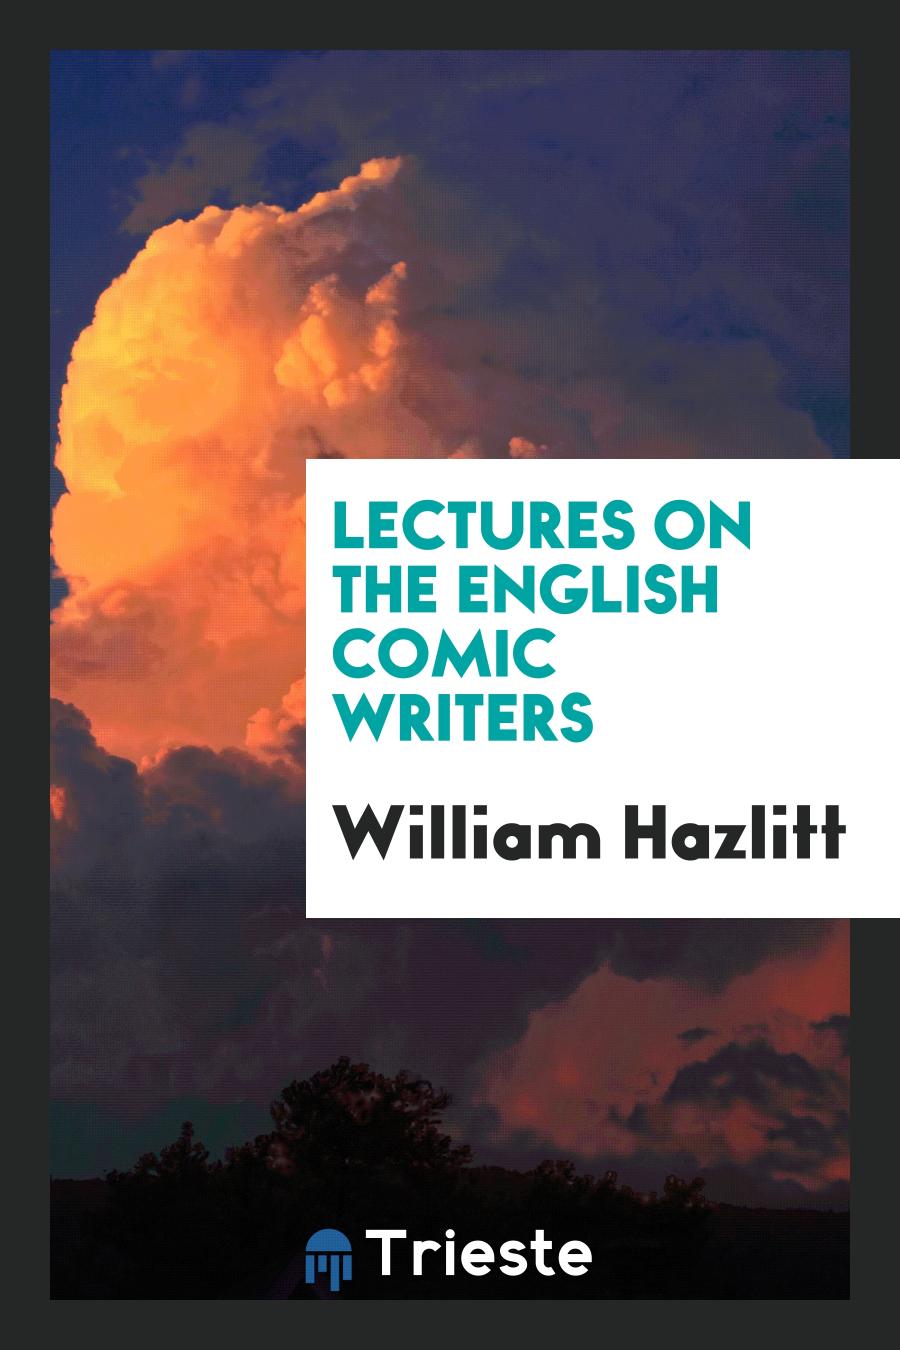 Lectures on the English comic writers